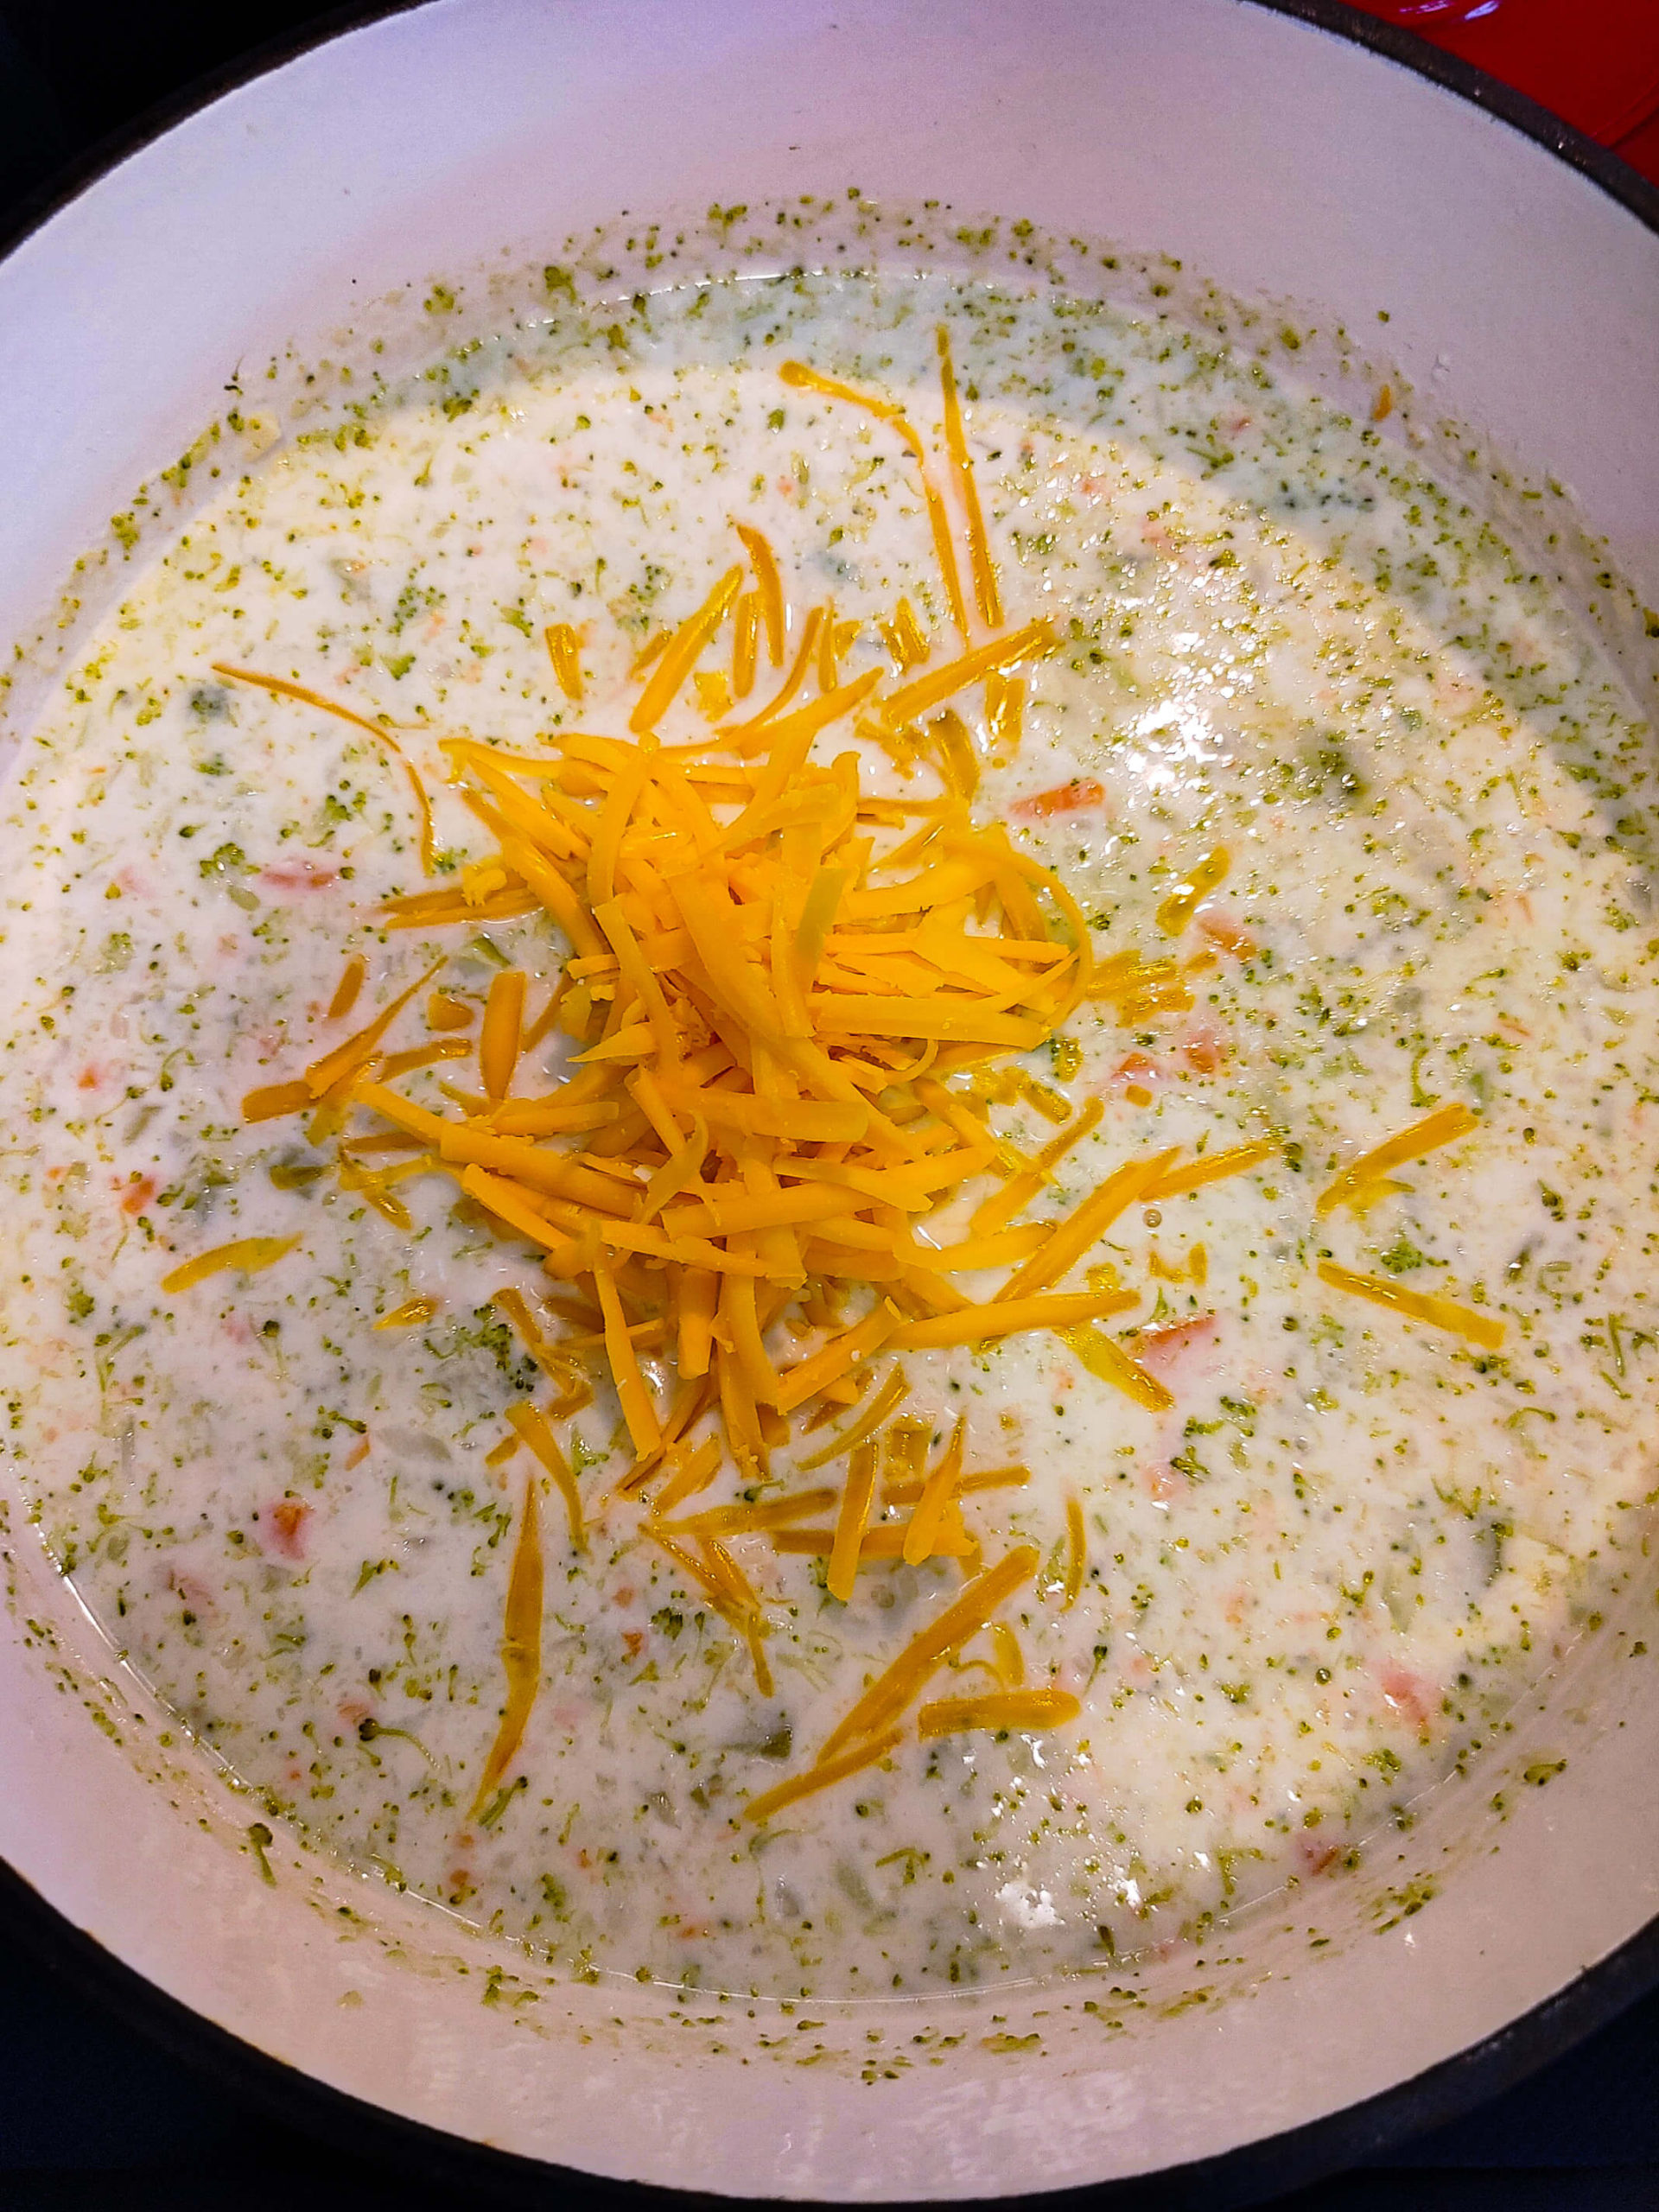 aDD HEAVY WHIPPING CREAM AND EXTRA SHARP CHEDDAR CHEESE TO THE POT